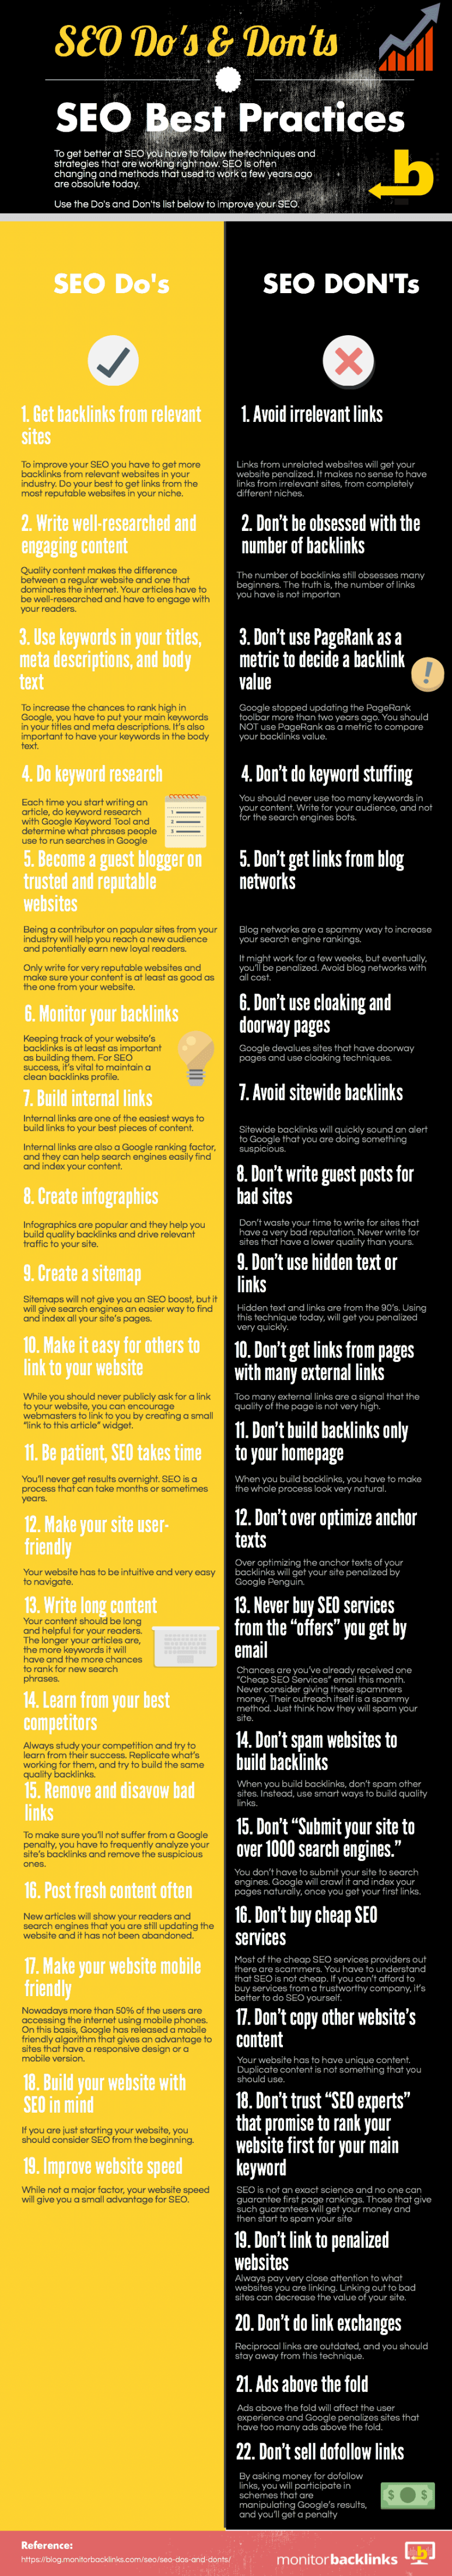 seo-dos-and-donts-best-practices-infographic.png